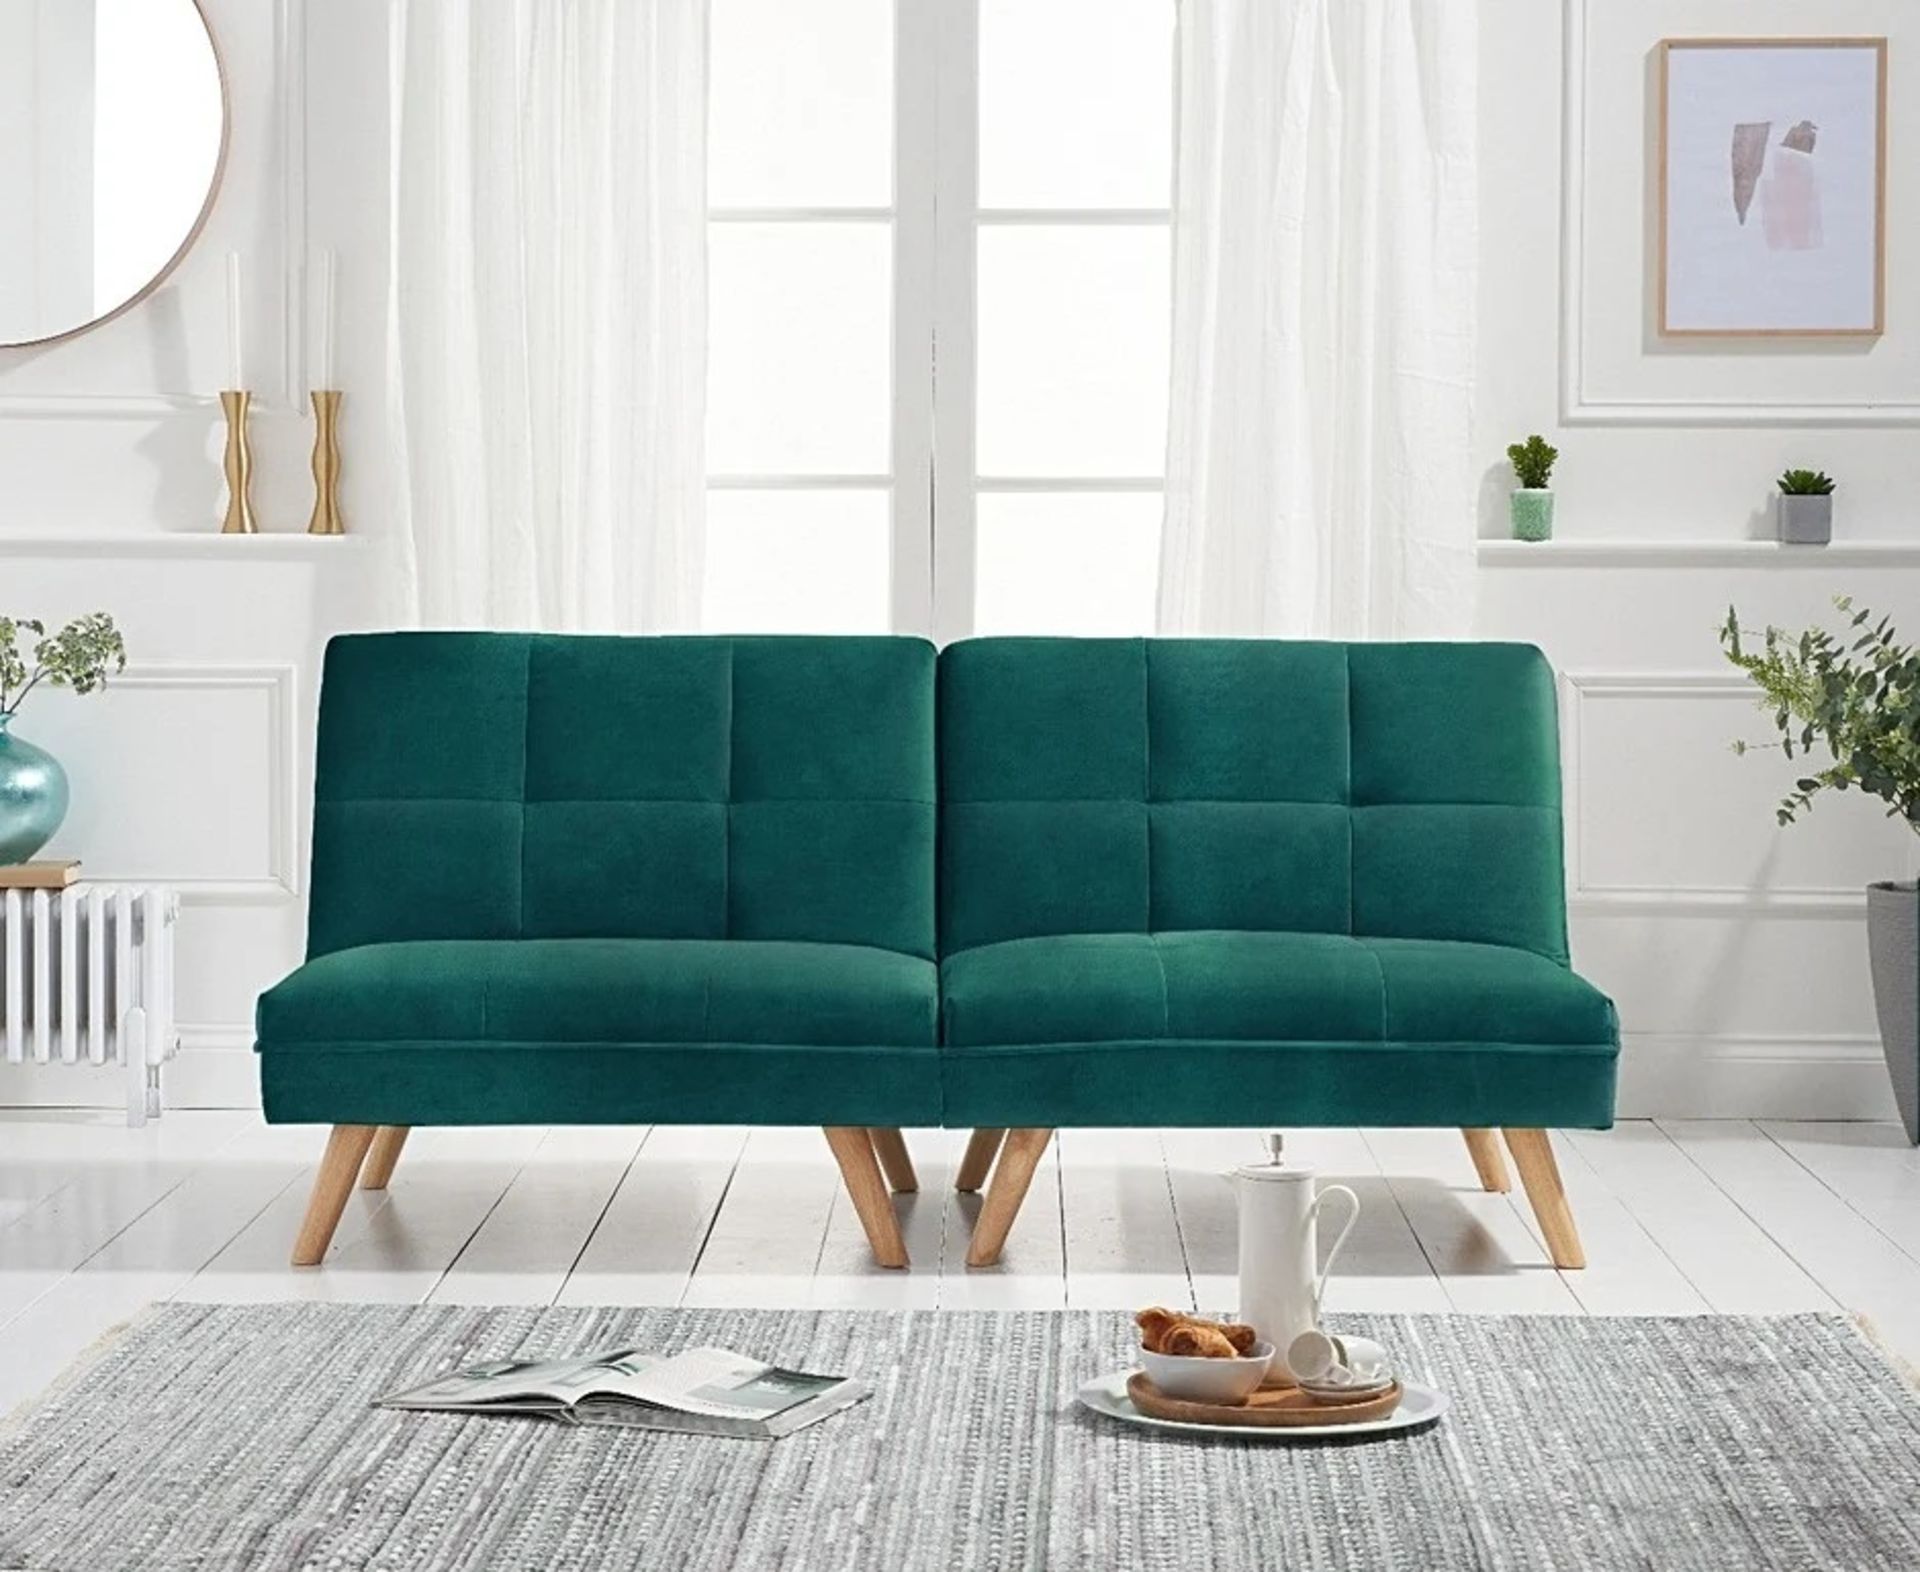 Ivy Green Velvet 3 Seater Fold Down Sofa Bed The Eye-Catching Ivy Sofa Bed Folds In A Number Of - Image 2 of 2